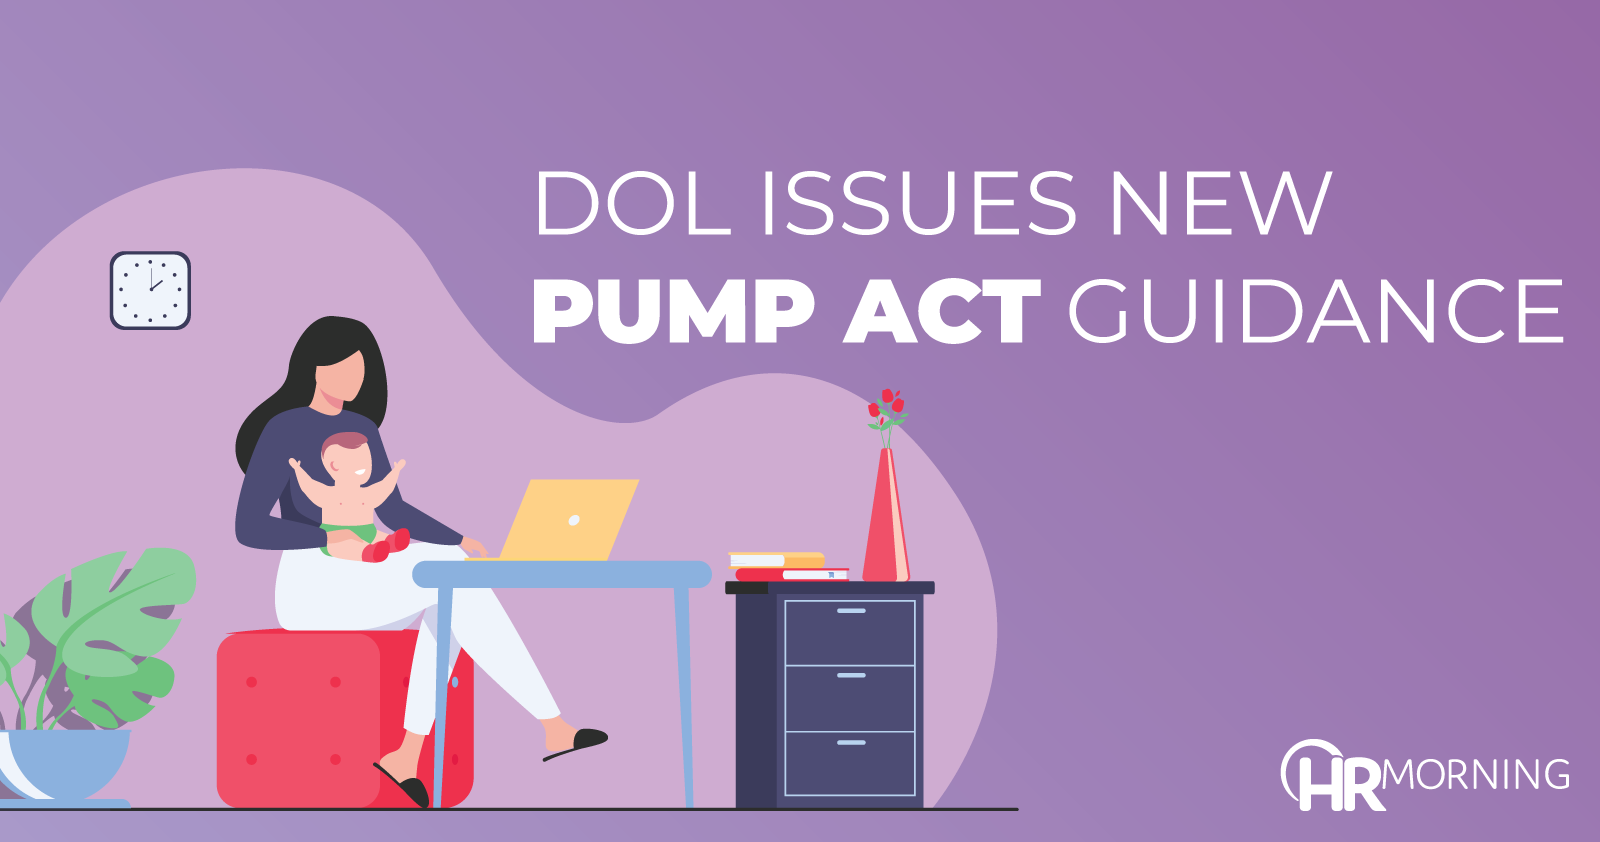 DOL issues new PUMP Act guidance